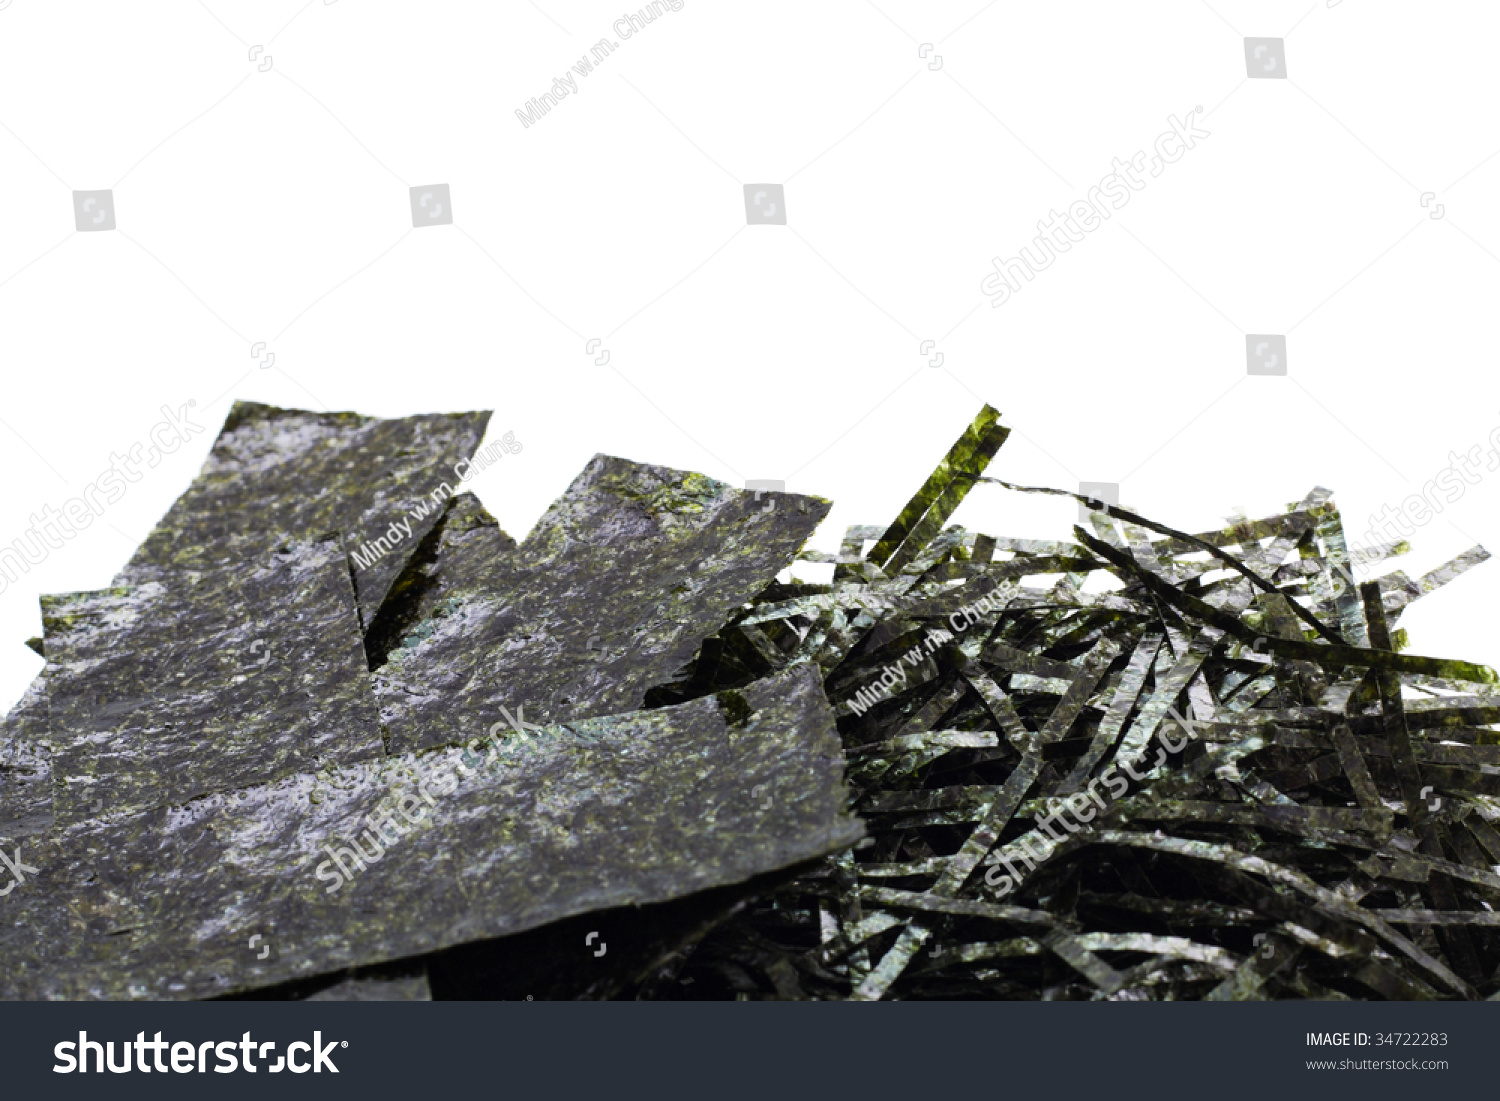 Paper-pieces and shreds of seasoned and dried seaweed, isolated on white with copyspace at the top #34722283